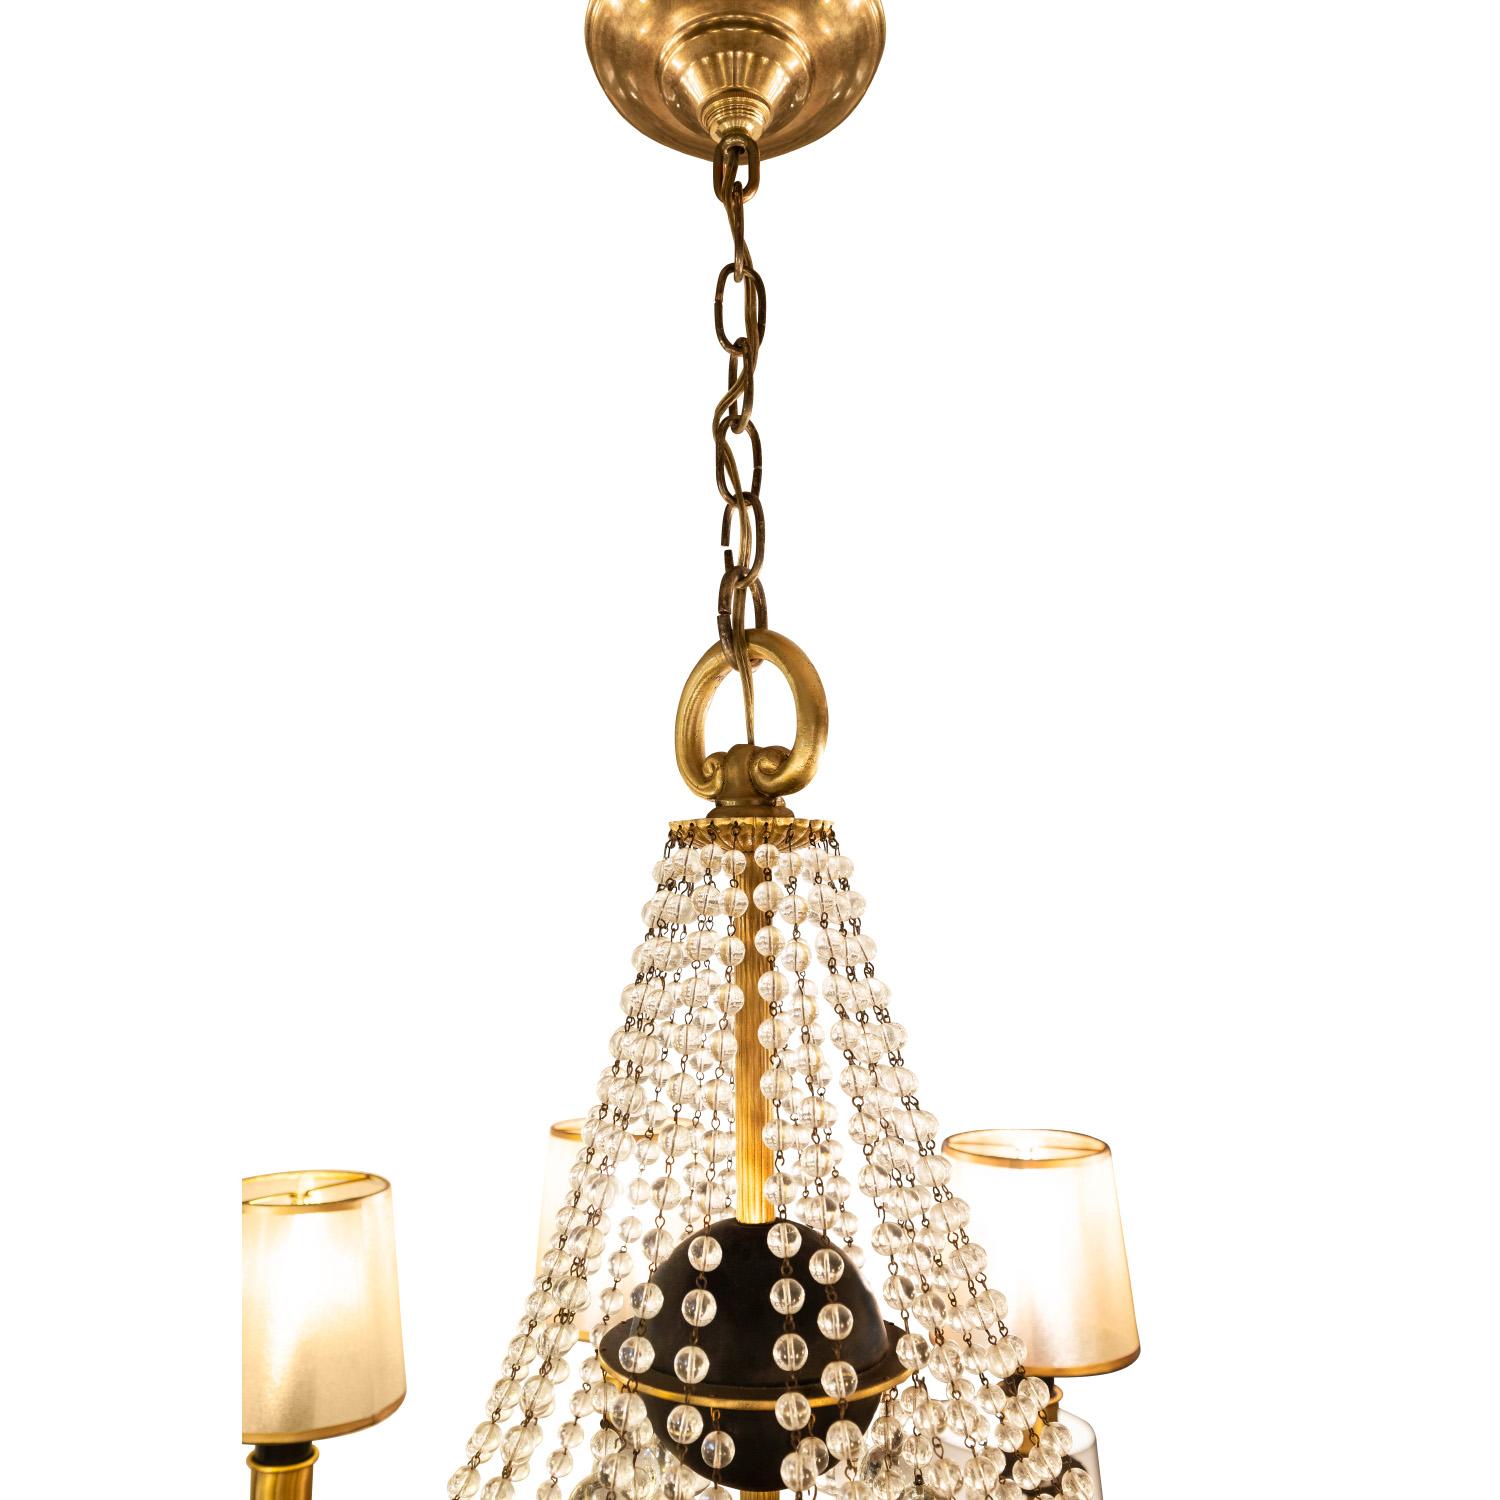 Brass Tommi Parzinger Attributed Elegant 10 Arm Chandelier with Crystals 1950s For Sale